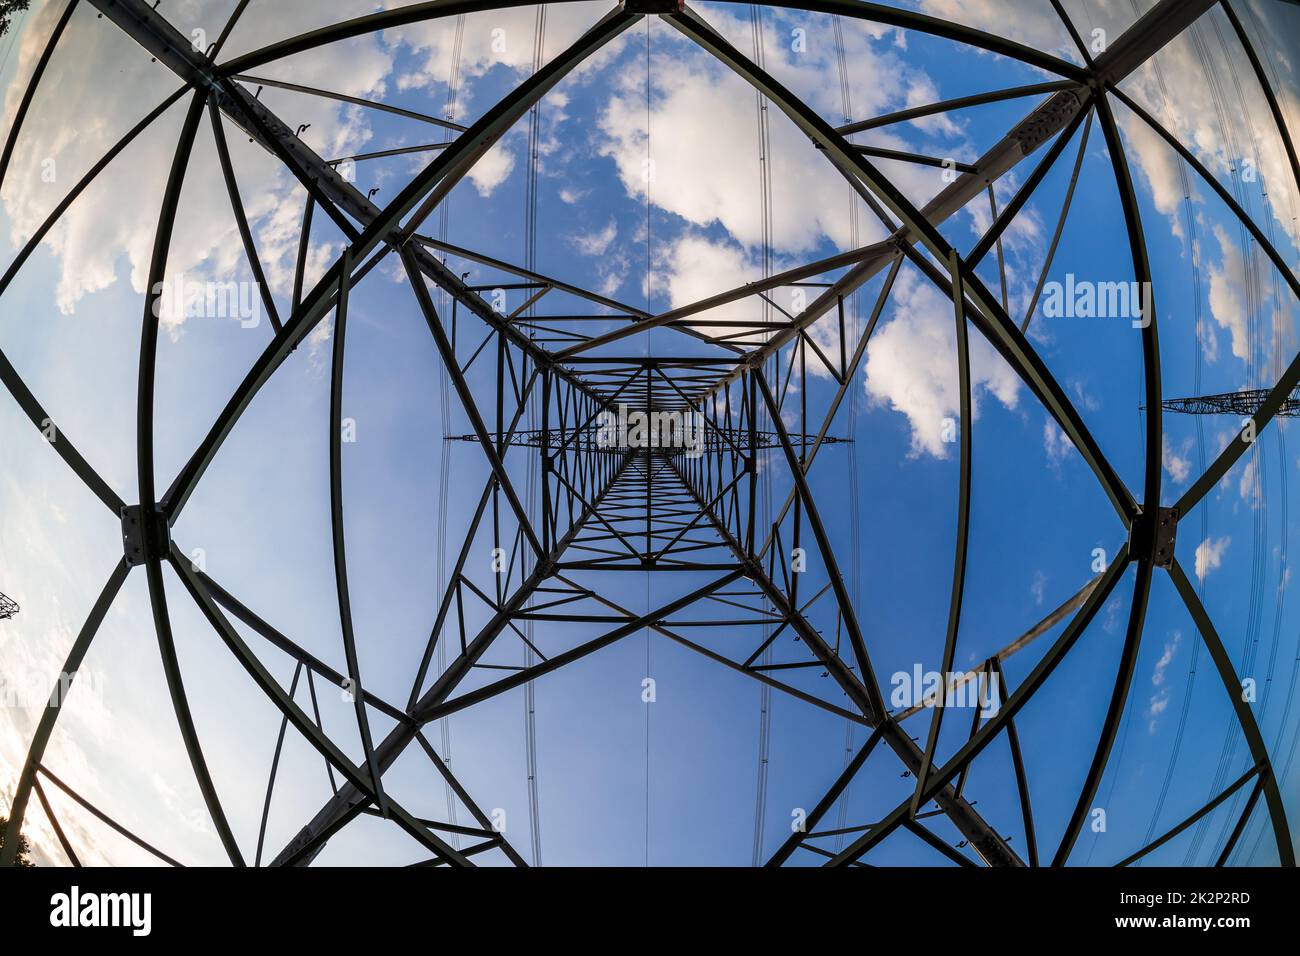 Abstract metal structure (high-voltage power pole) on a blue sky background. Fisheye lens. Stock Photo